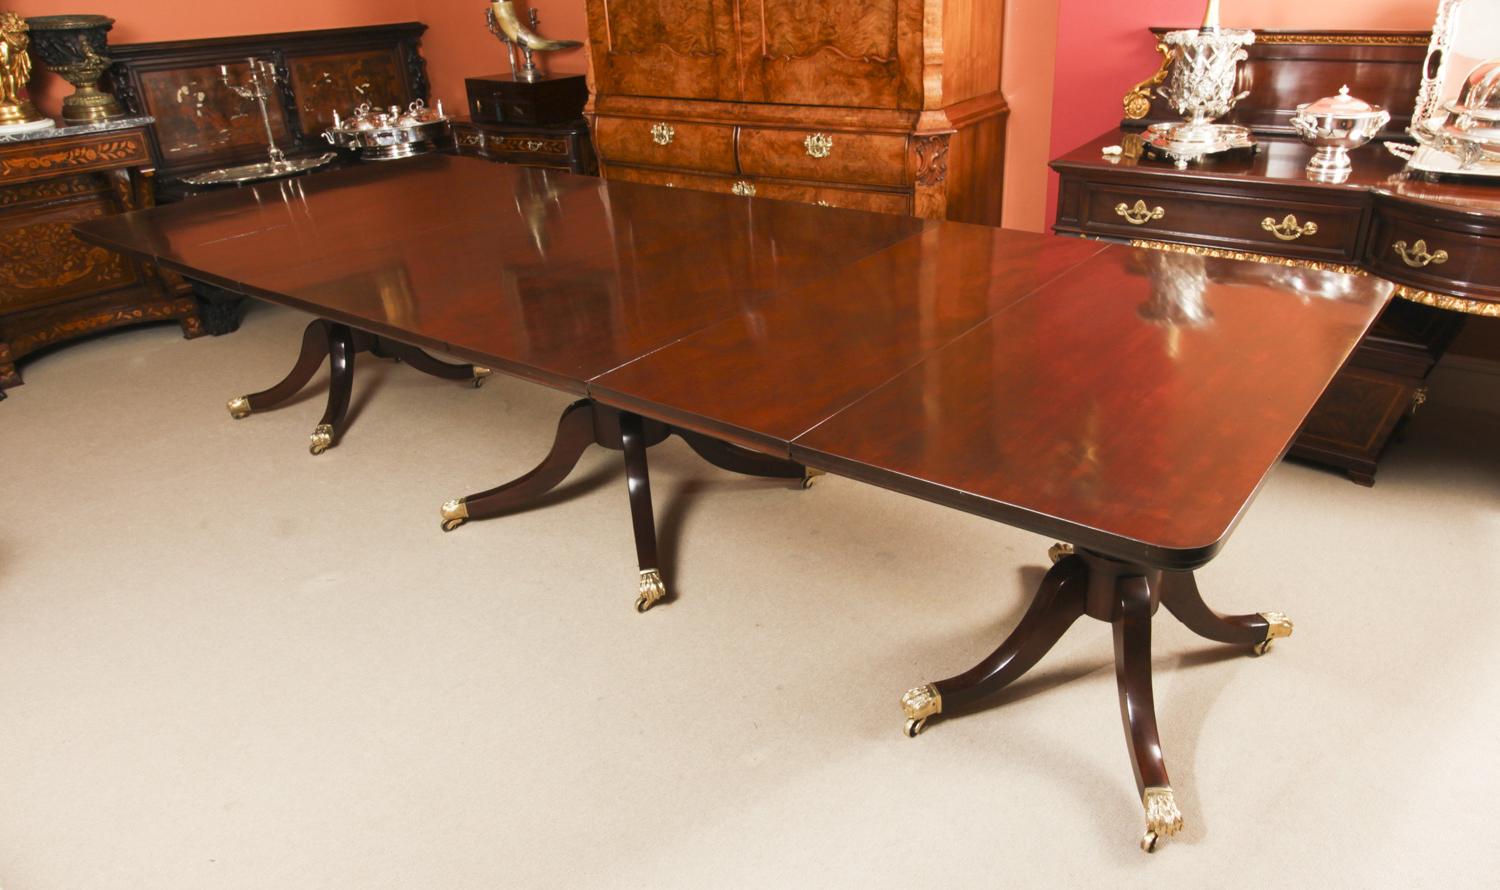 English Antique George III Regency Dining Table with 12 Regency Dining Chairs 19th C